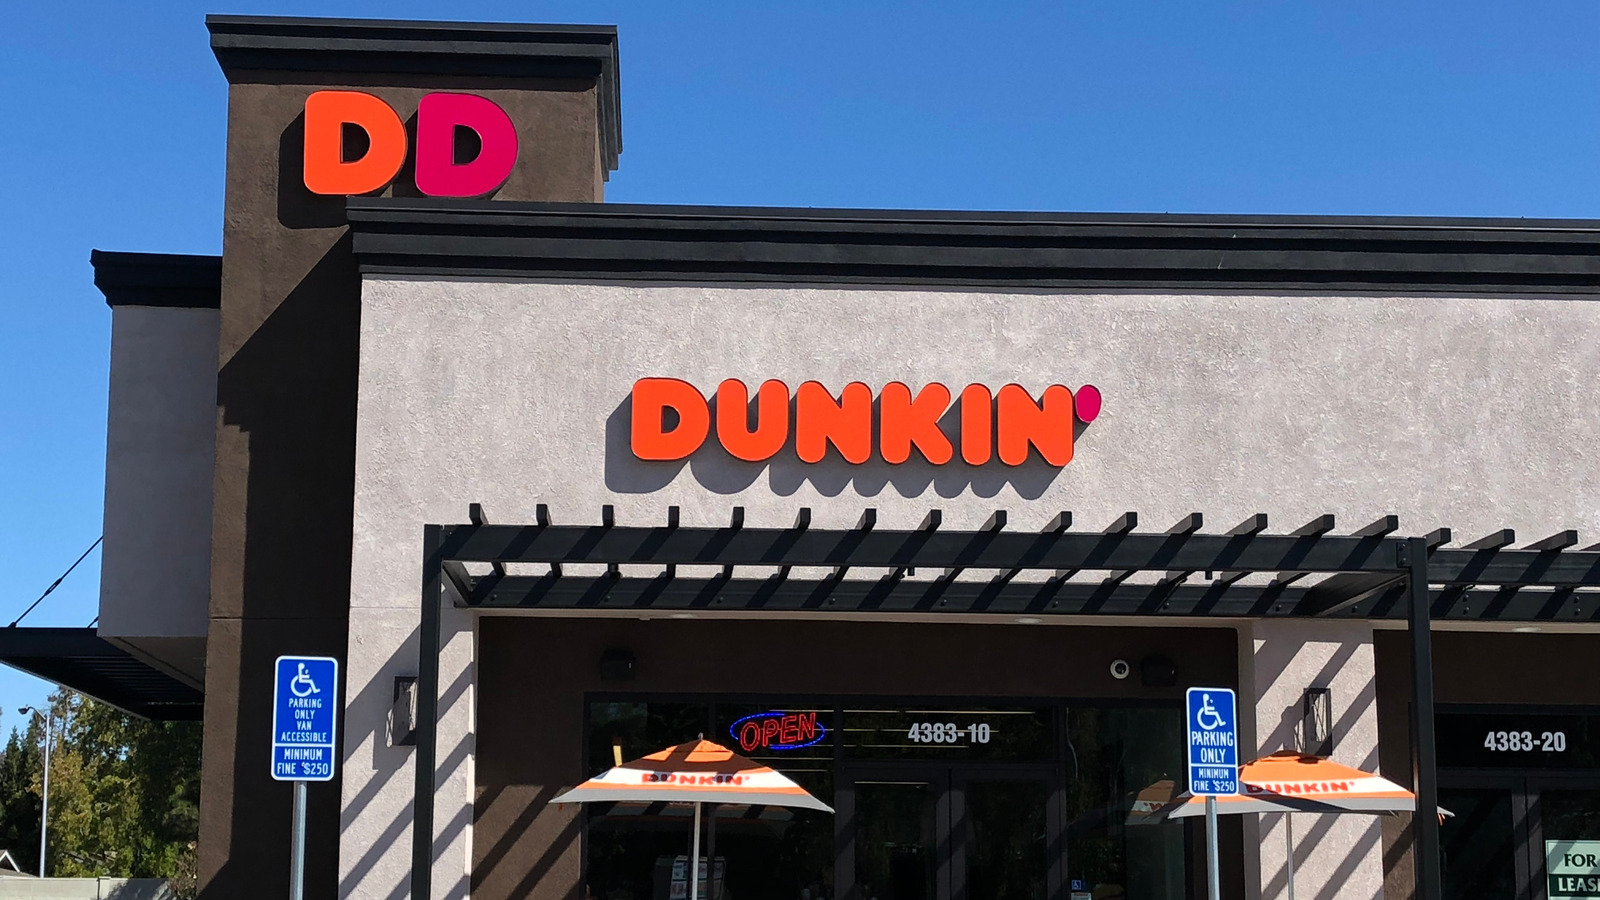 The Real Reason Dunkin' Changed Its Name